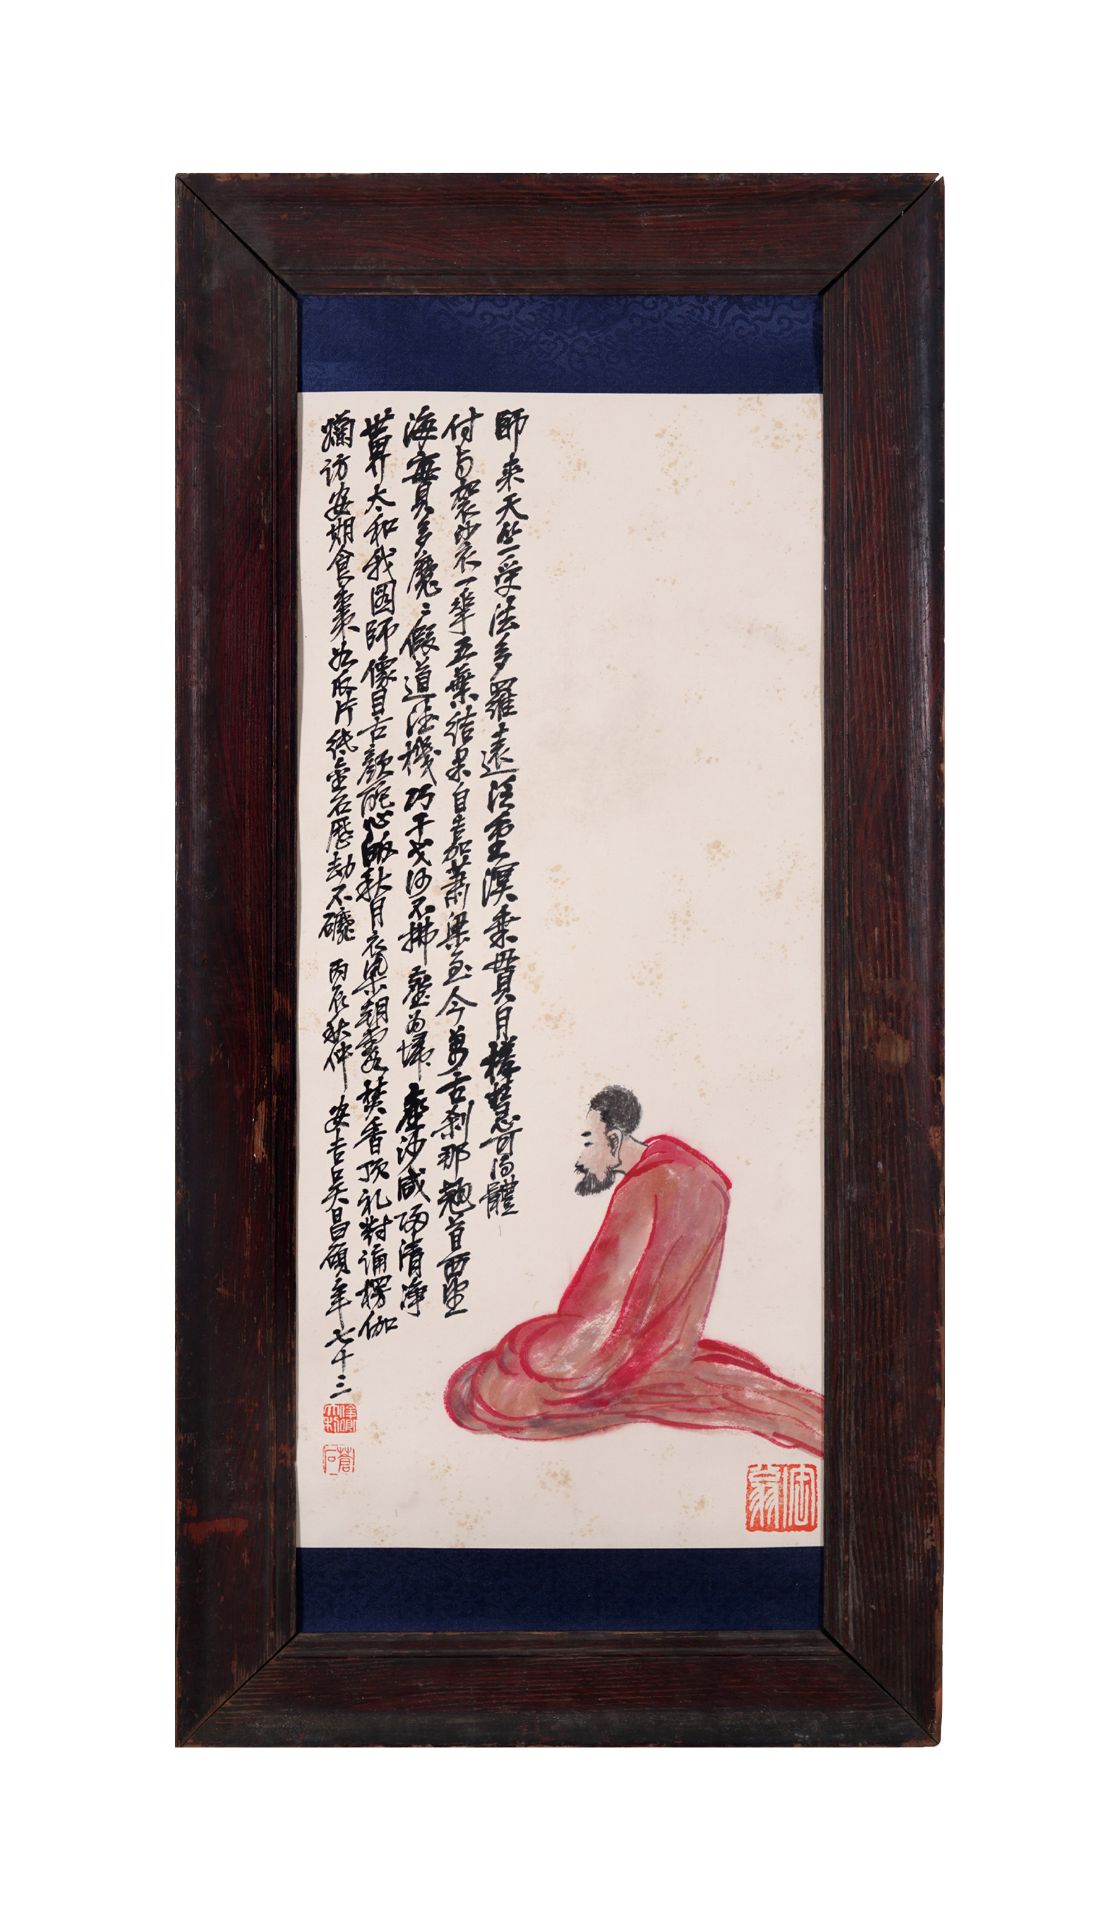 A Chinese Frame Painting By Wu Changshuo - Image 2 of 13